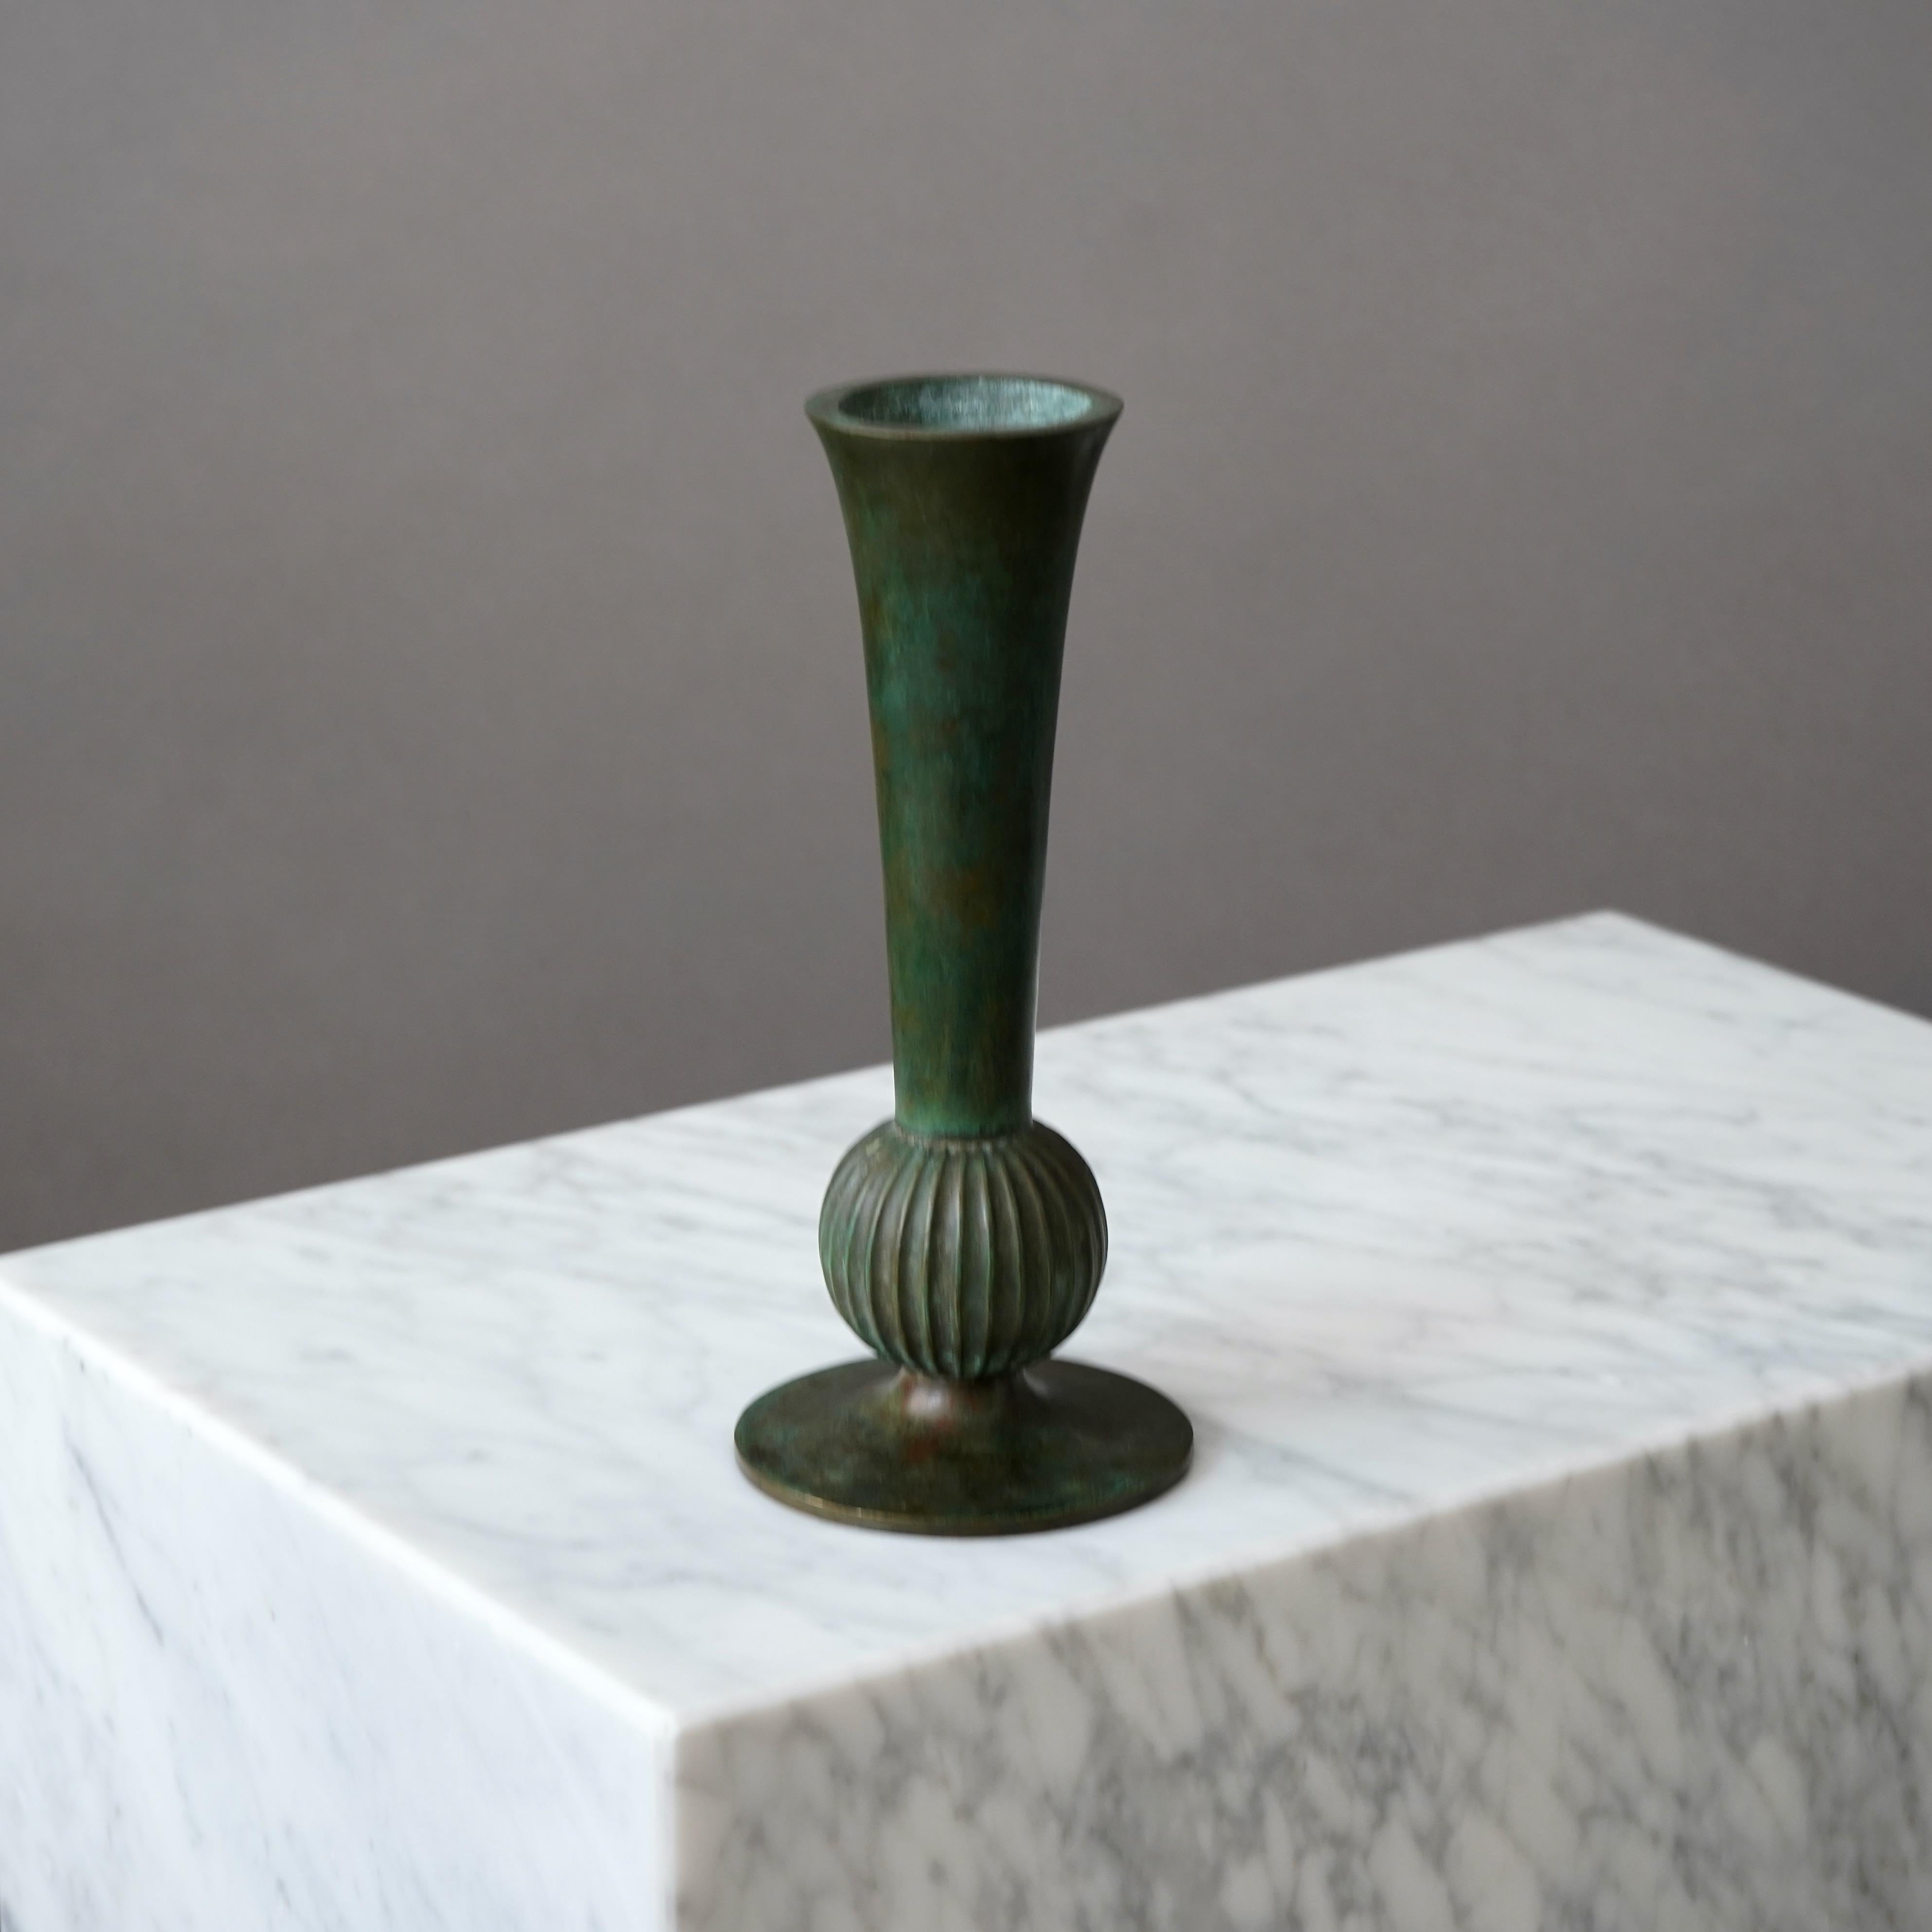 A beautiful bronze vase with amazing patina. Designed by Sune Bäckström in Malmoe, Sweden, 1920s.  

Great condition.
Stamped 'BRONS', model number '9043' and signature 'Sune Bäckström'.

Produced by Einar Bäckström Metallvarufabrik in Malmö,